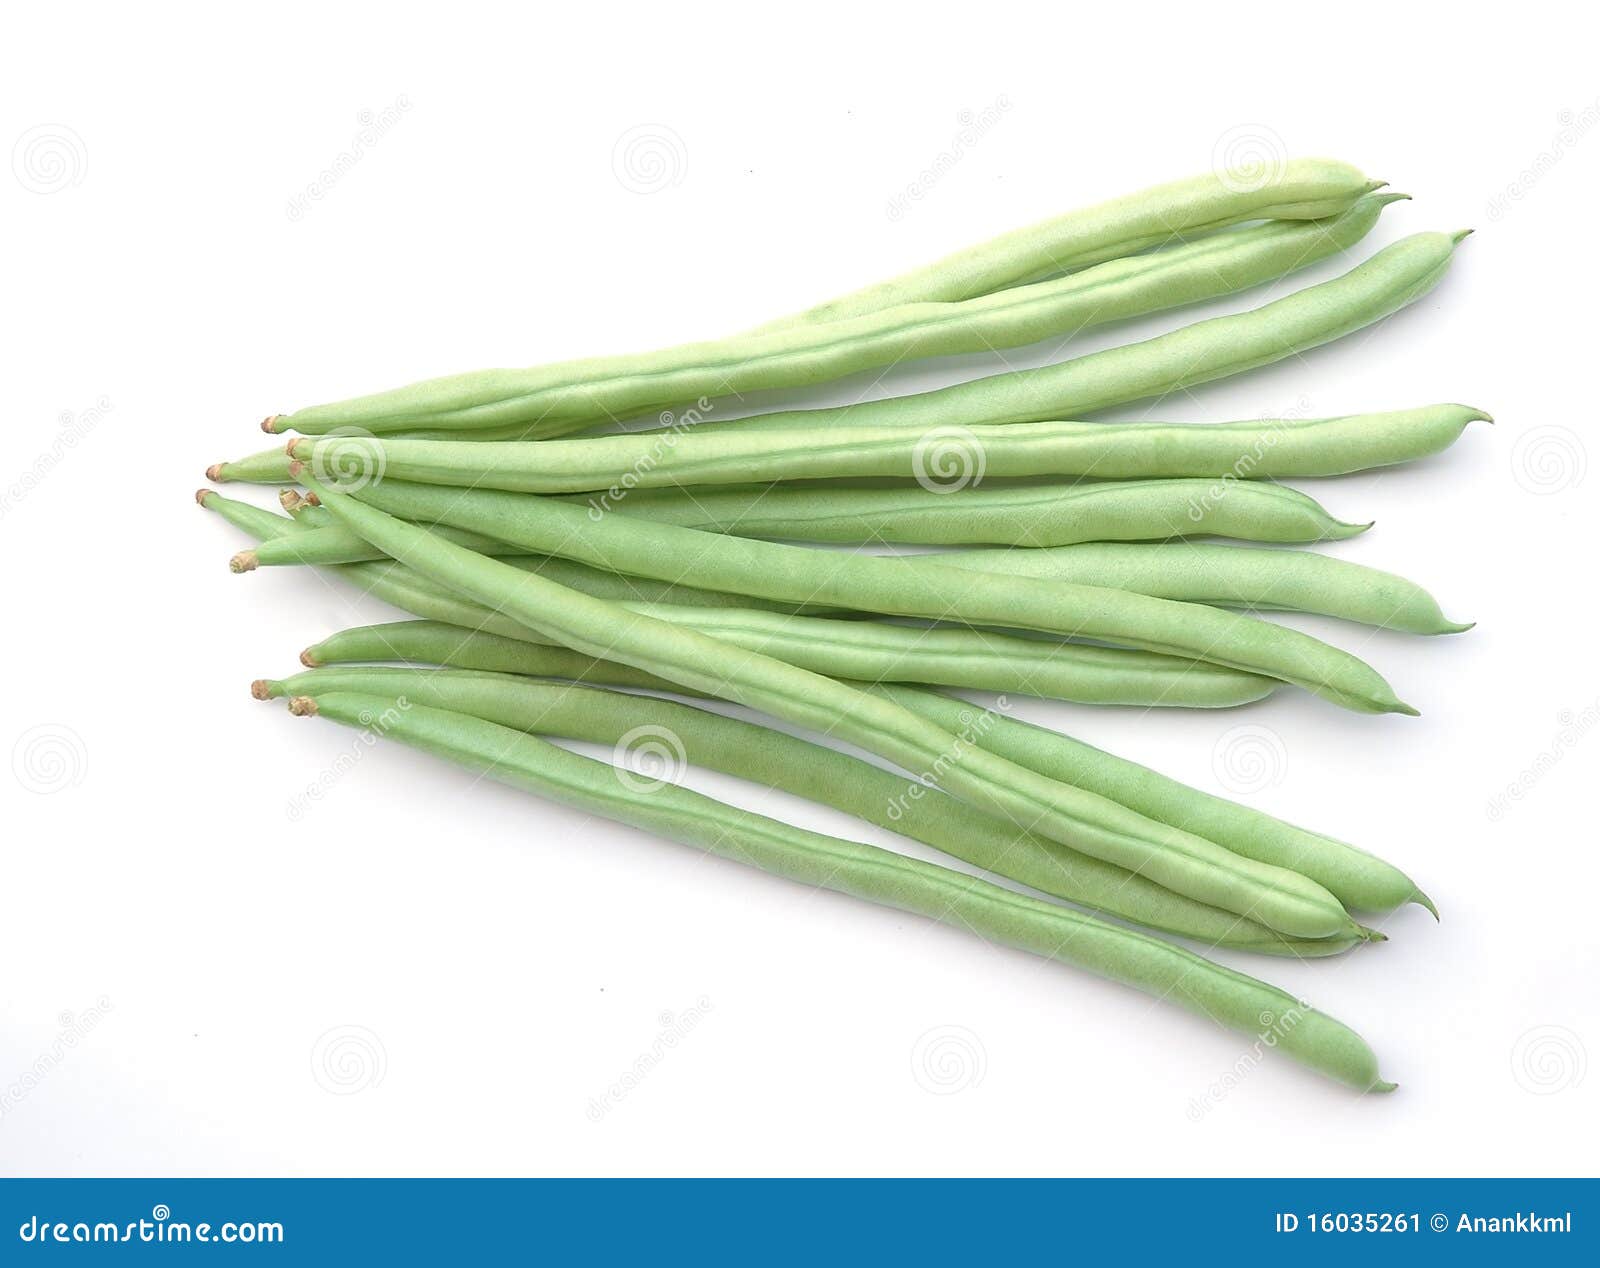 Bunch beans stock image. Image of bunch, food, objects - 16035261